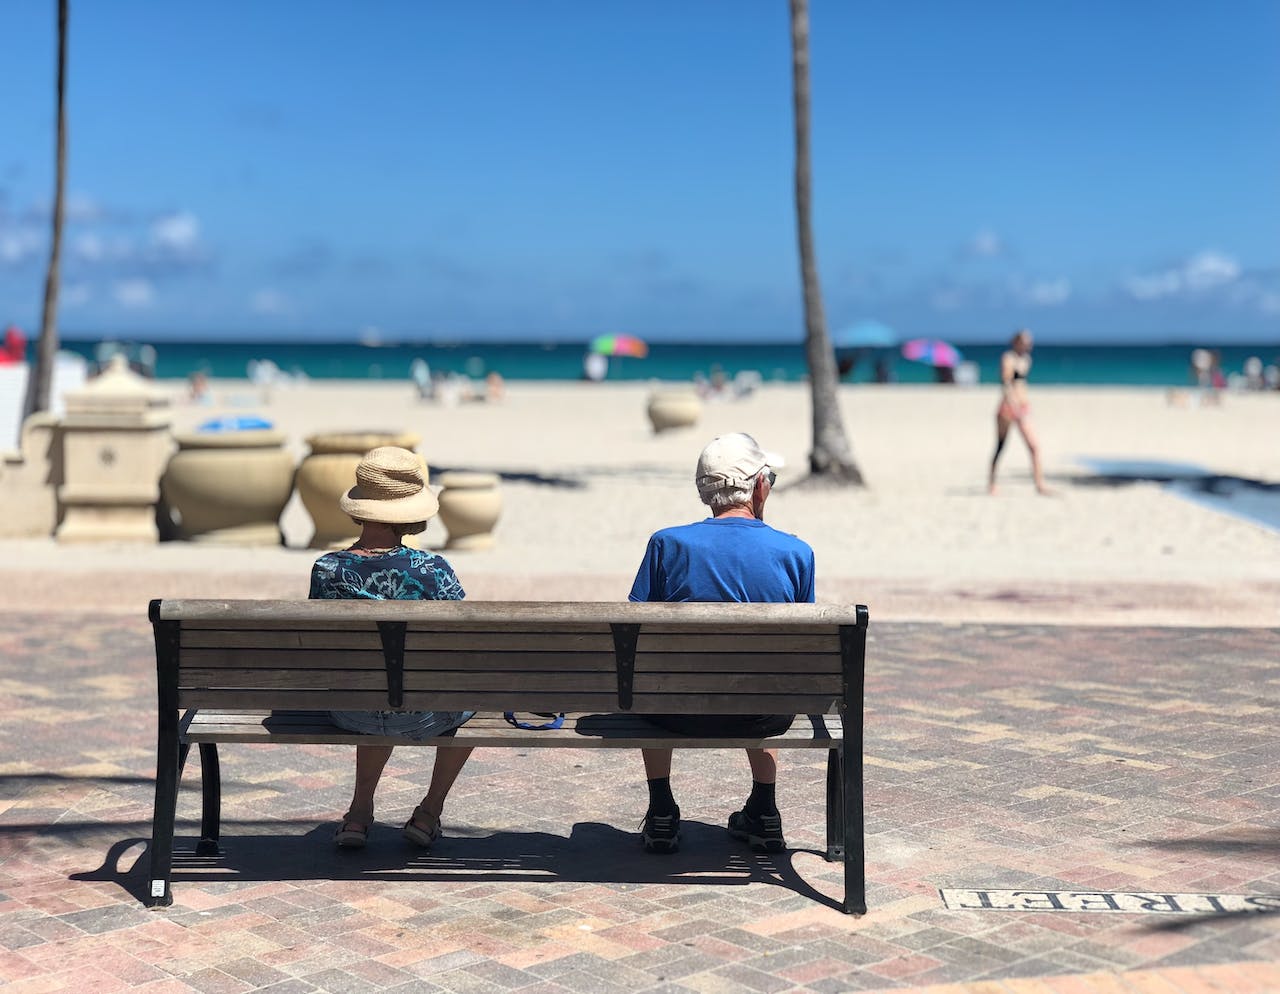 What Should You Know About Managing Assets for Retirement?